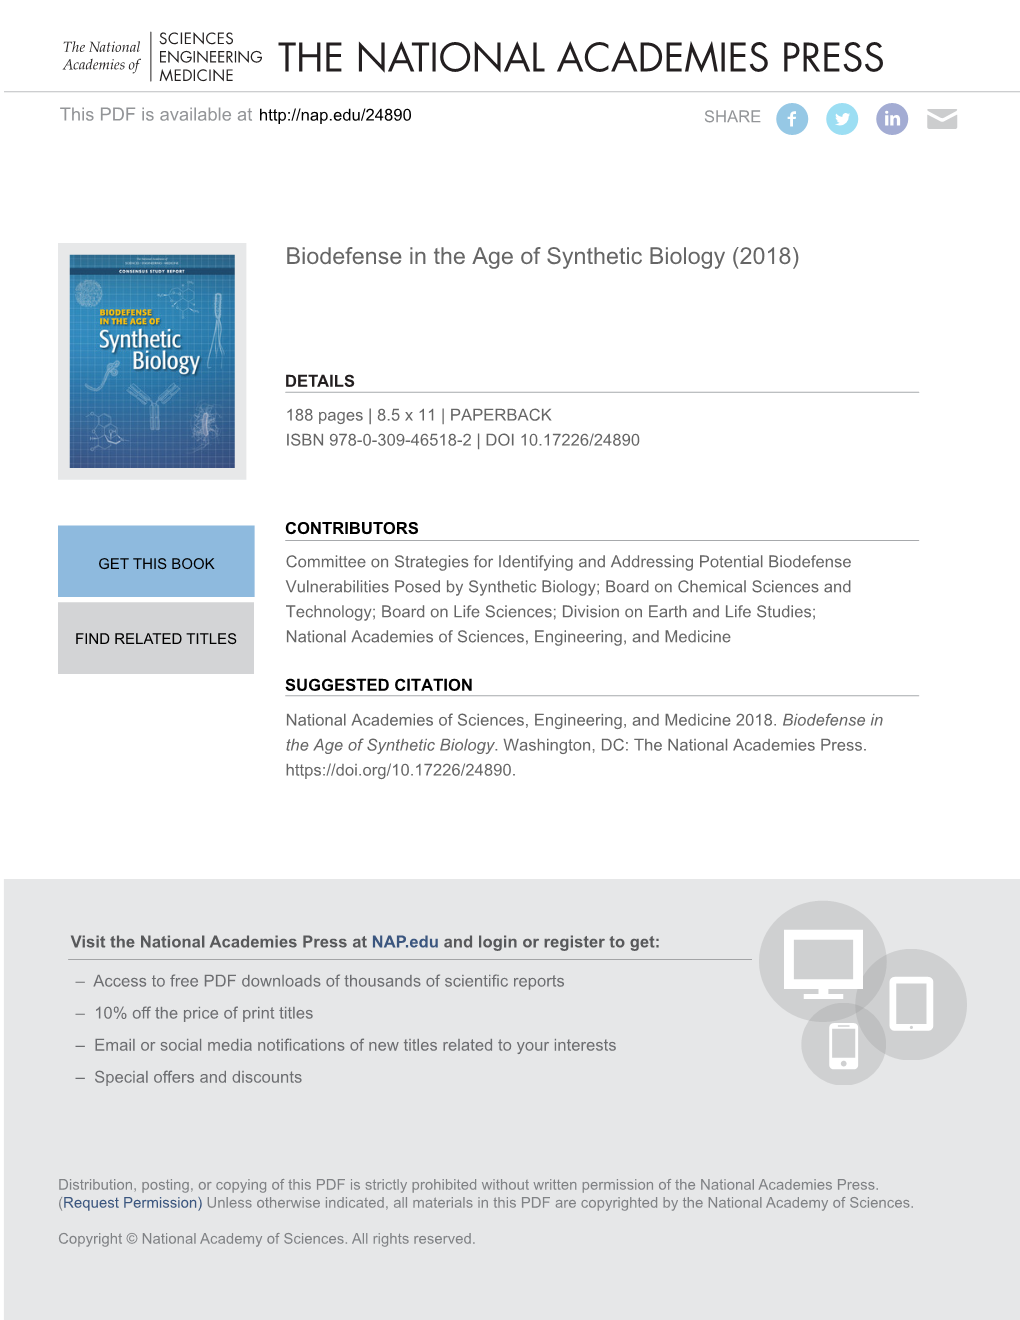 Biodefense in the Age of Synthetic Biology.Pdf